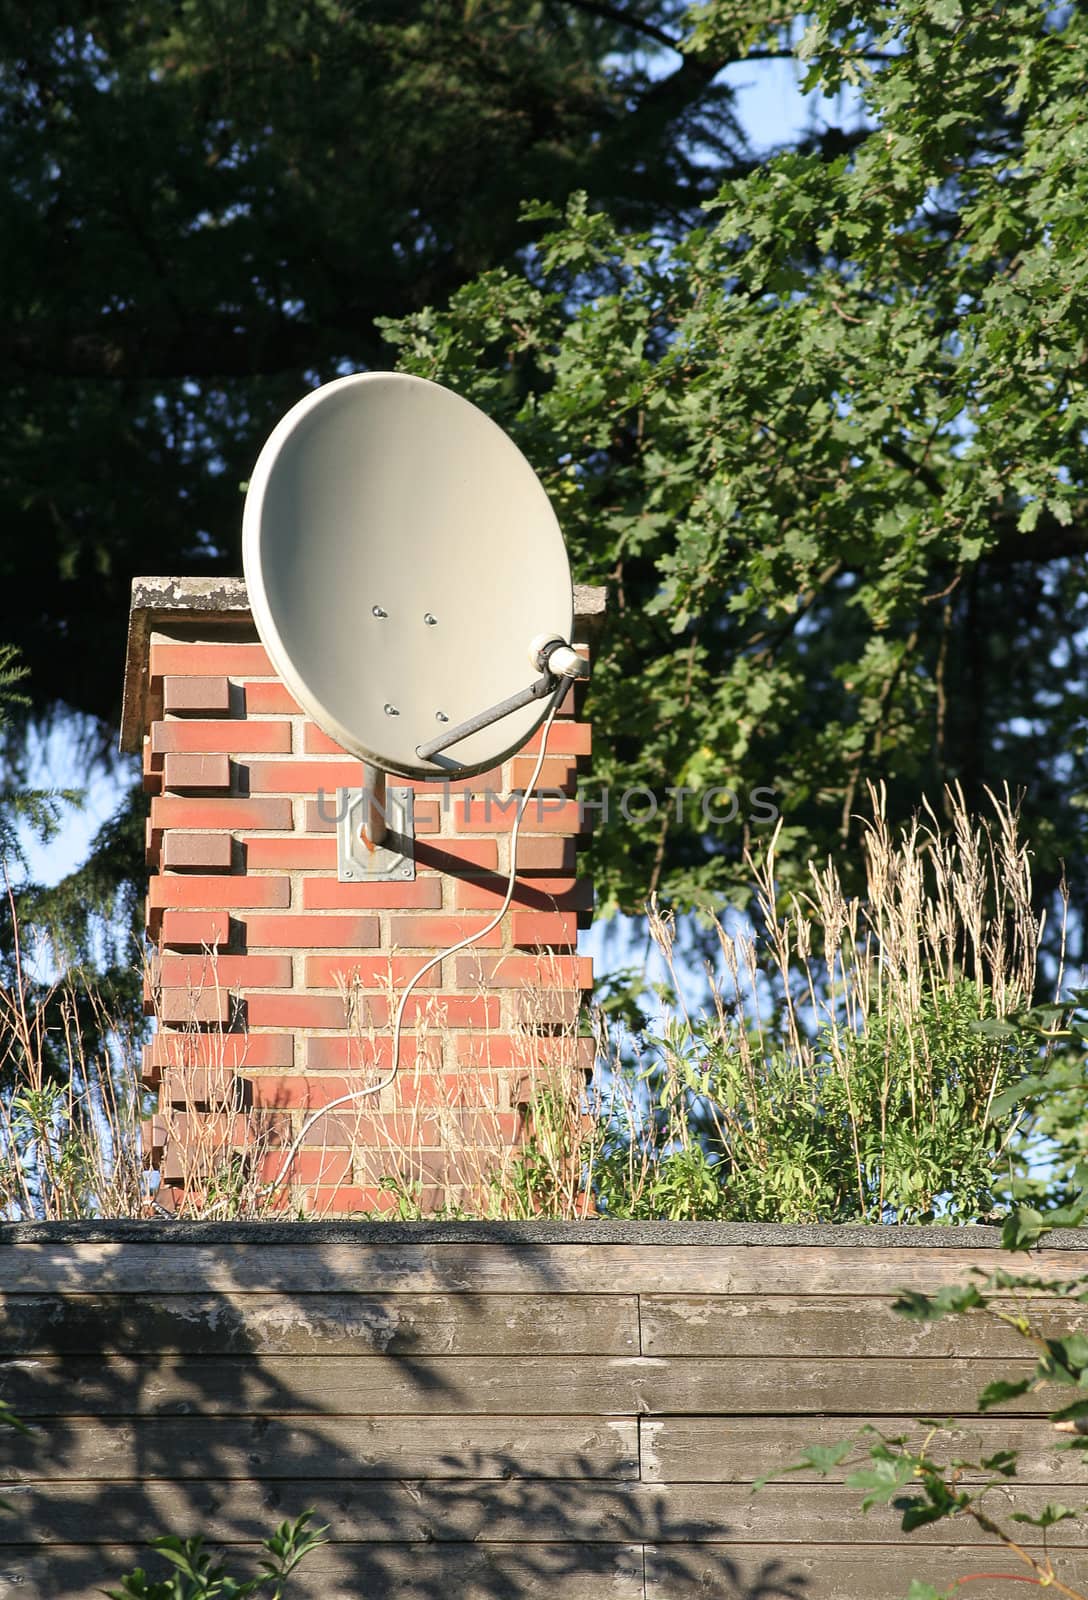 Satellite dish attached to the chimney of a house in the forest.